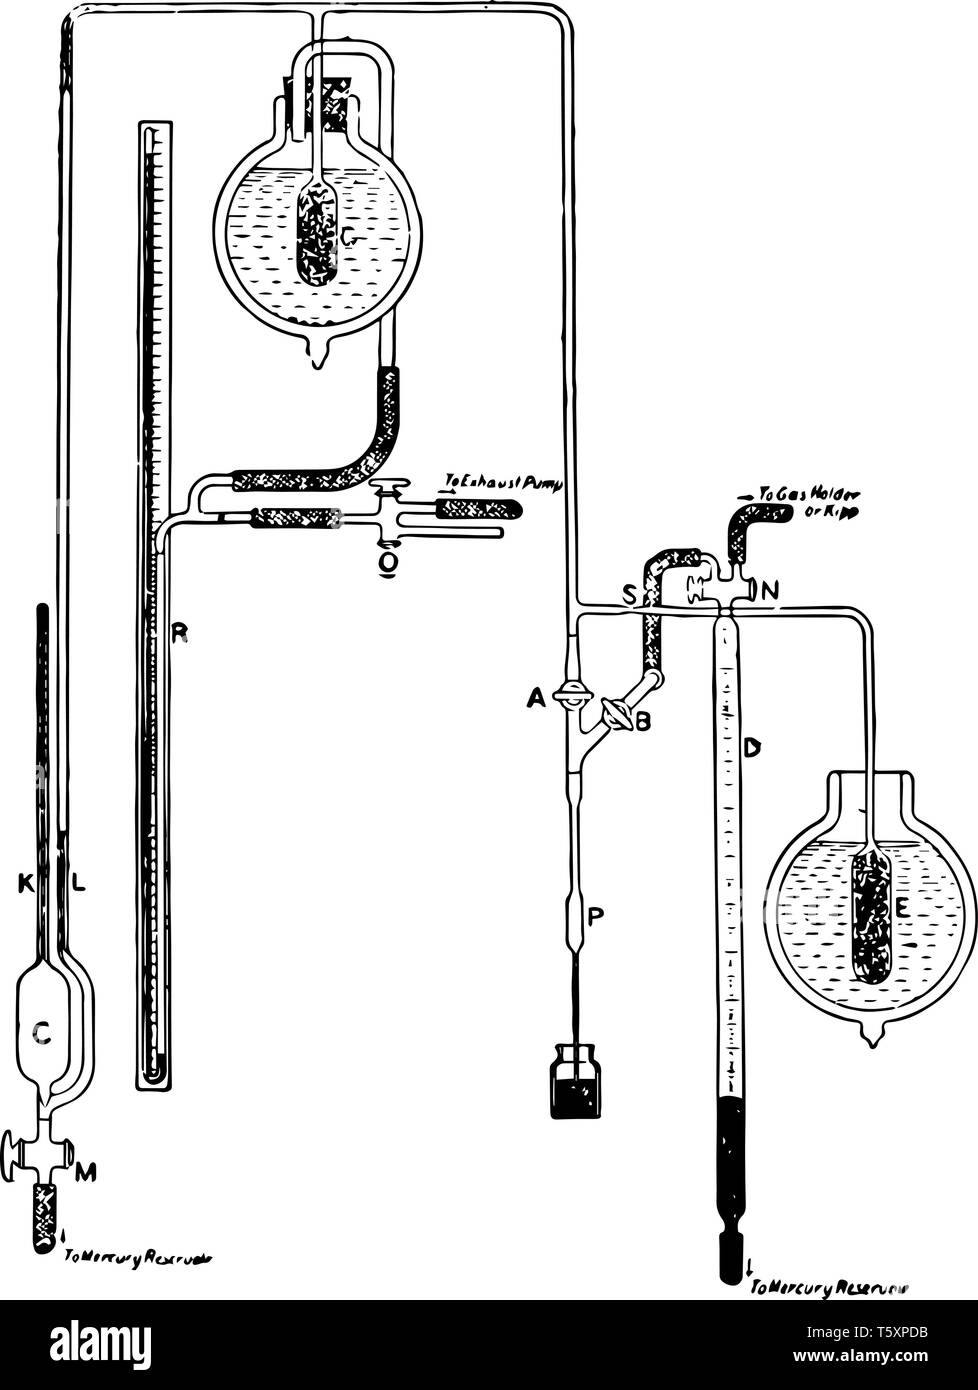 For measuring the gas concentration pressure and temperature use may be made of an apparatus of the type shown vintage line drawing or engraving illus Stock Vector